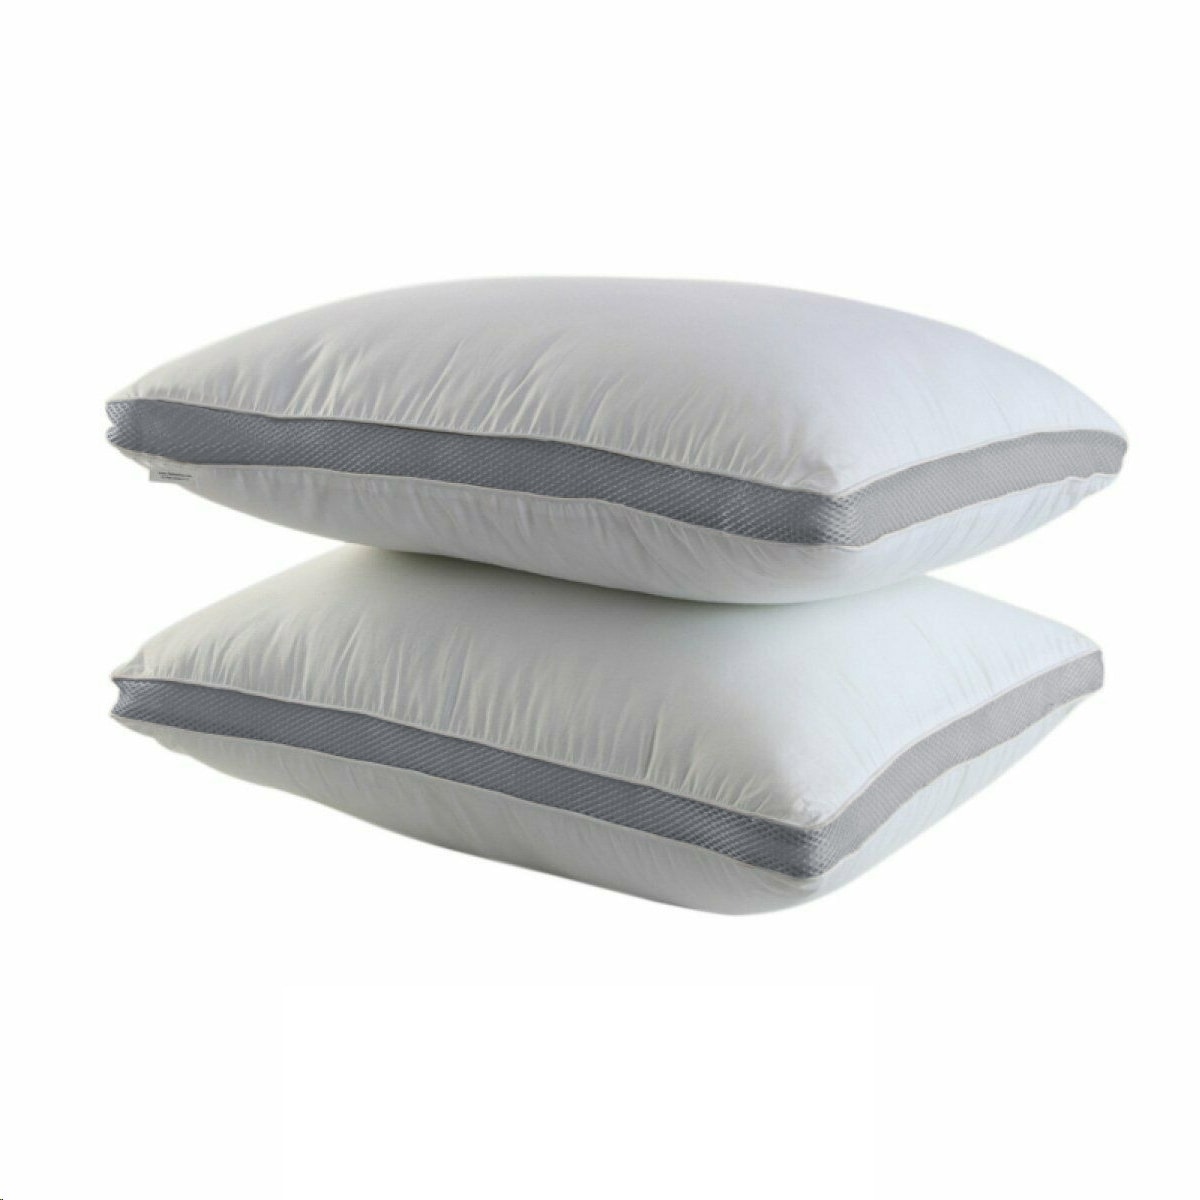 Sageston Gusseted Down Alt Cooling Pillow 2 Pack